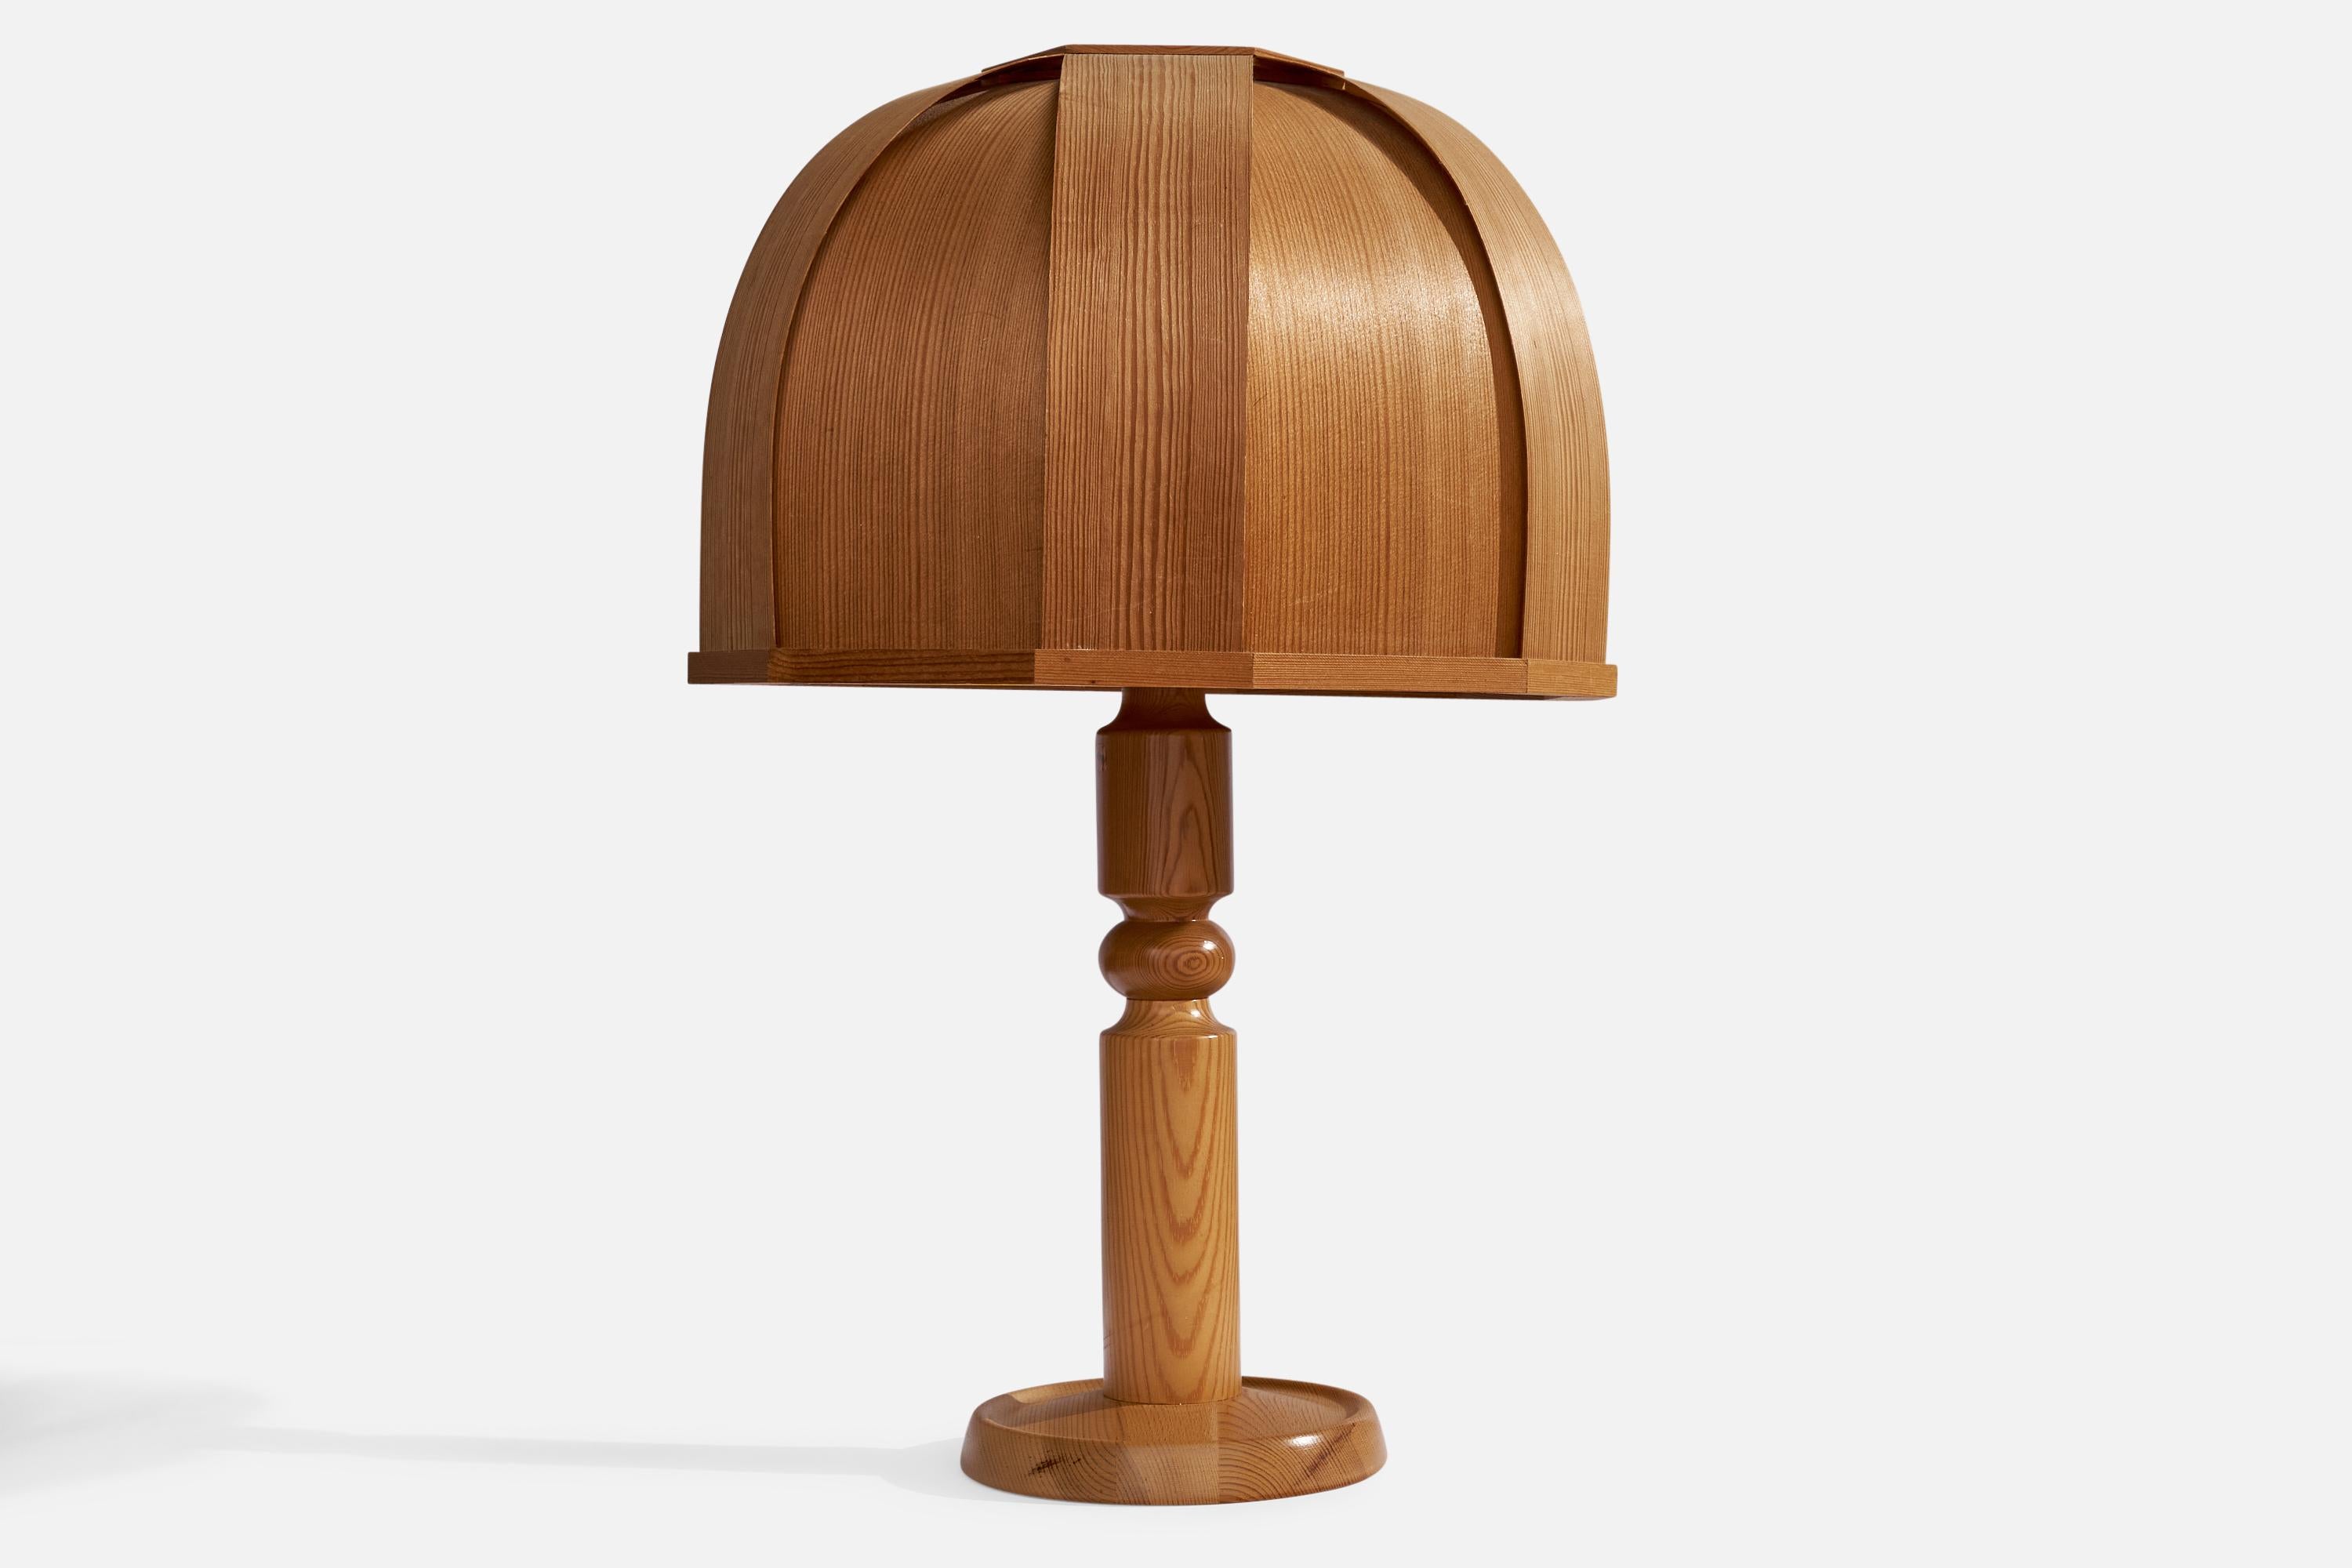 A pine and moulded pine veneer table lamp designed and produced by Solbackens Svarveri, Sweden, 1970s.

Overall Dimensions (inches): 24.5”  H x 15.5”  W x 16.5” D
Stated dimensions include shade.
Bulb Specifications: E-26 Bulb
Number of Sockets: